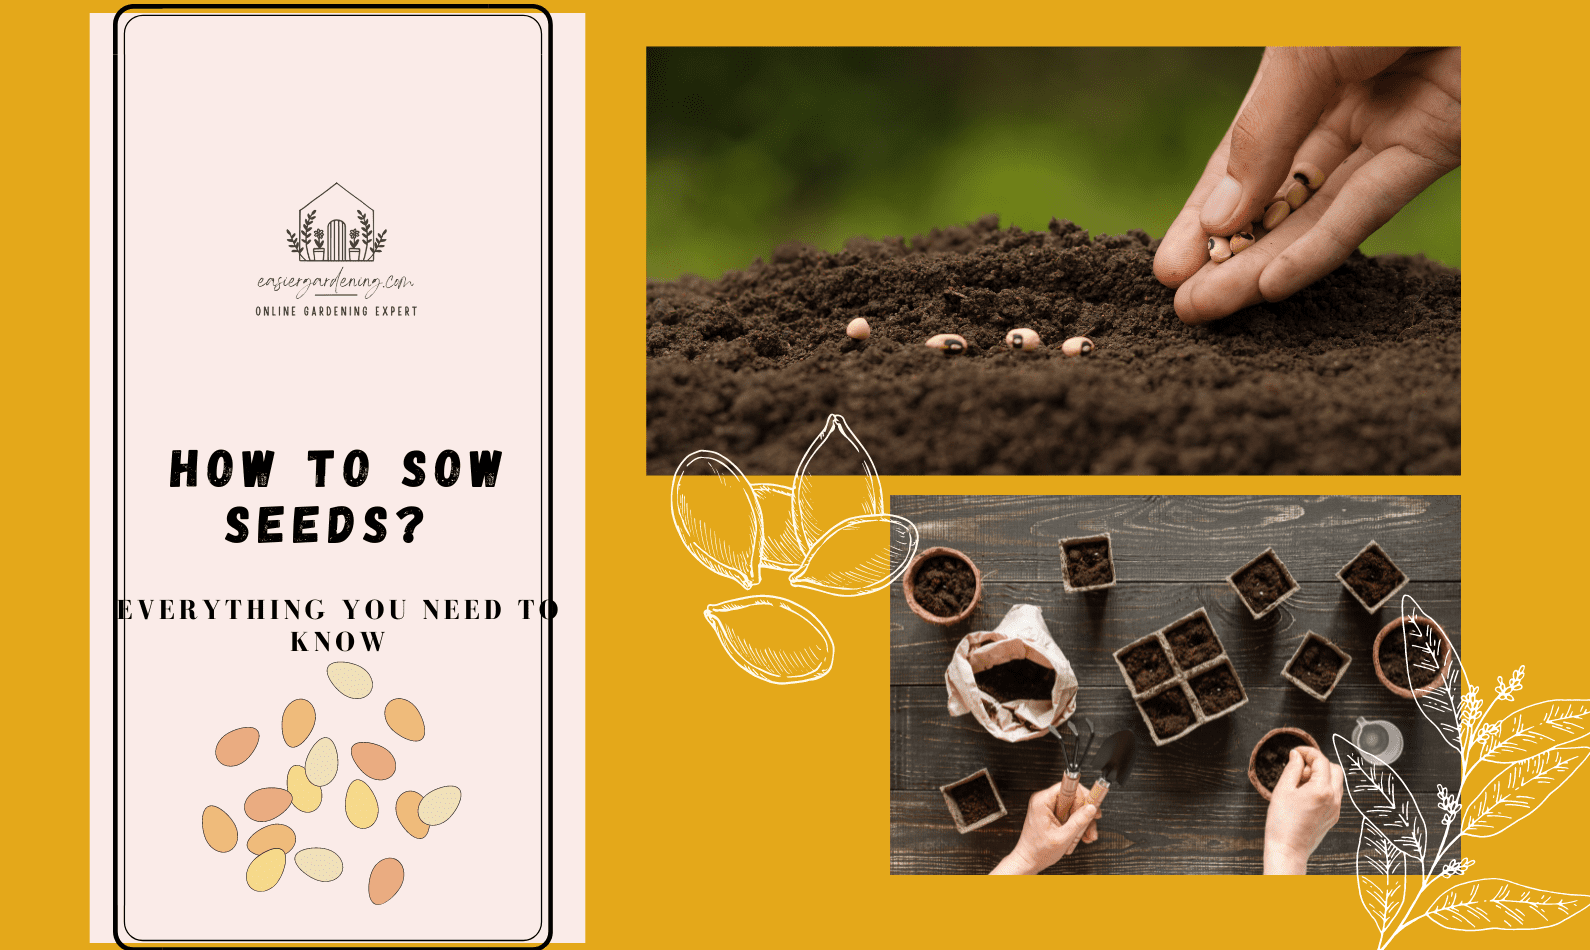 How To Sow Seeds?